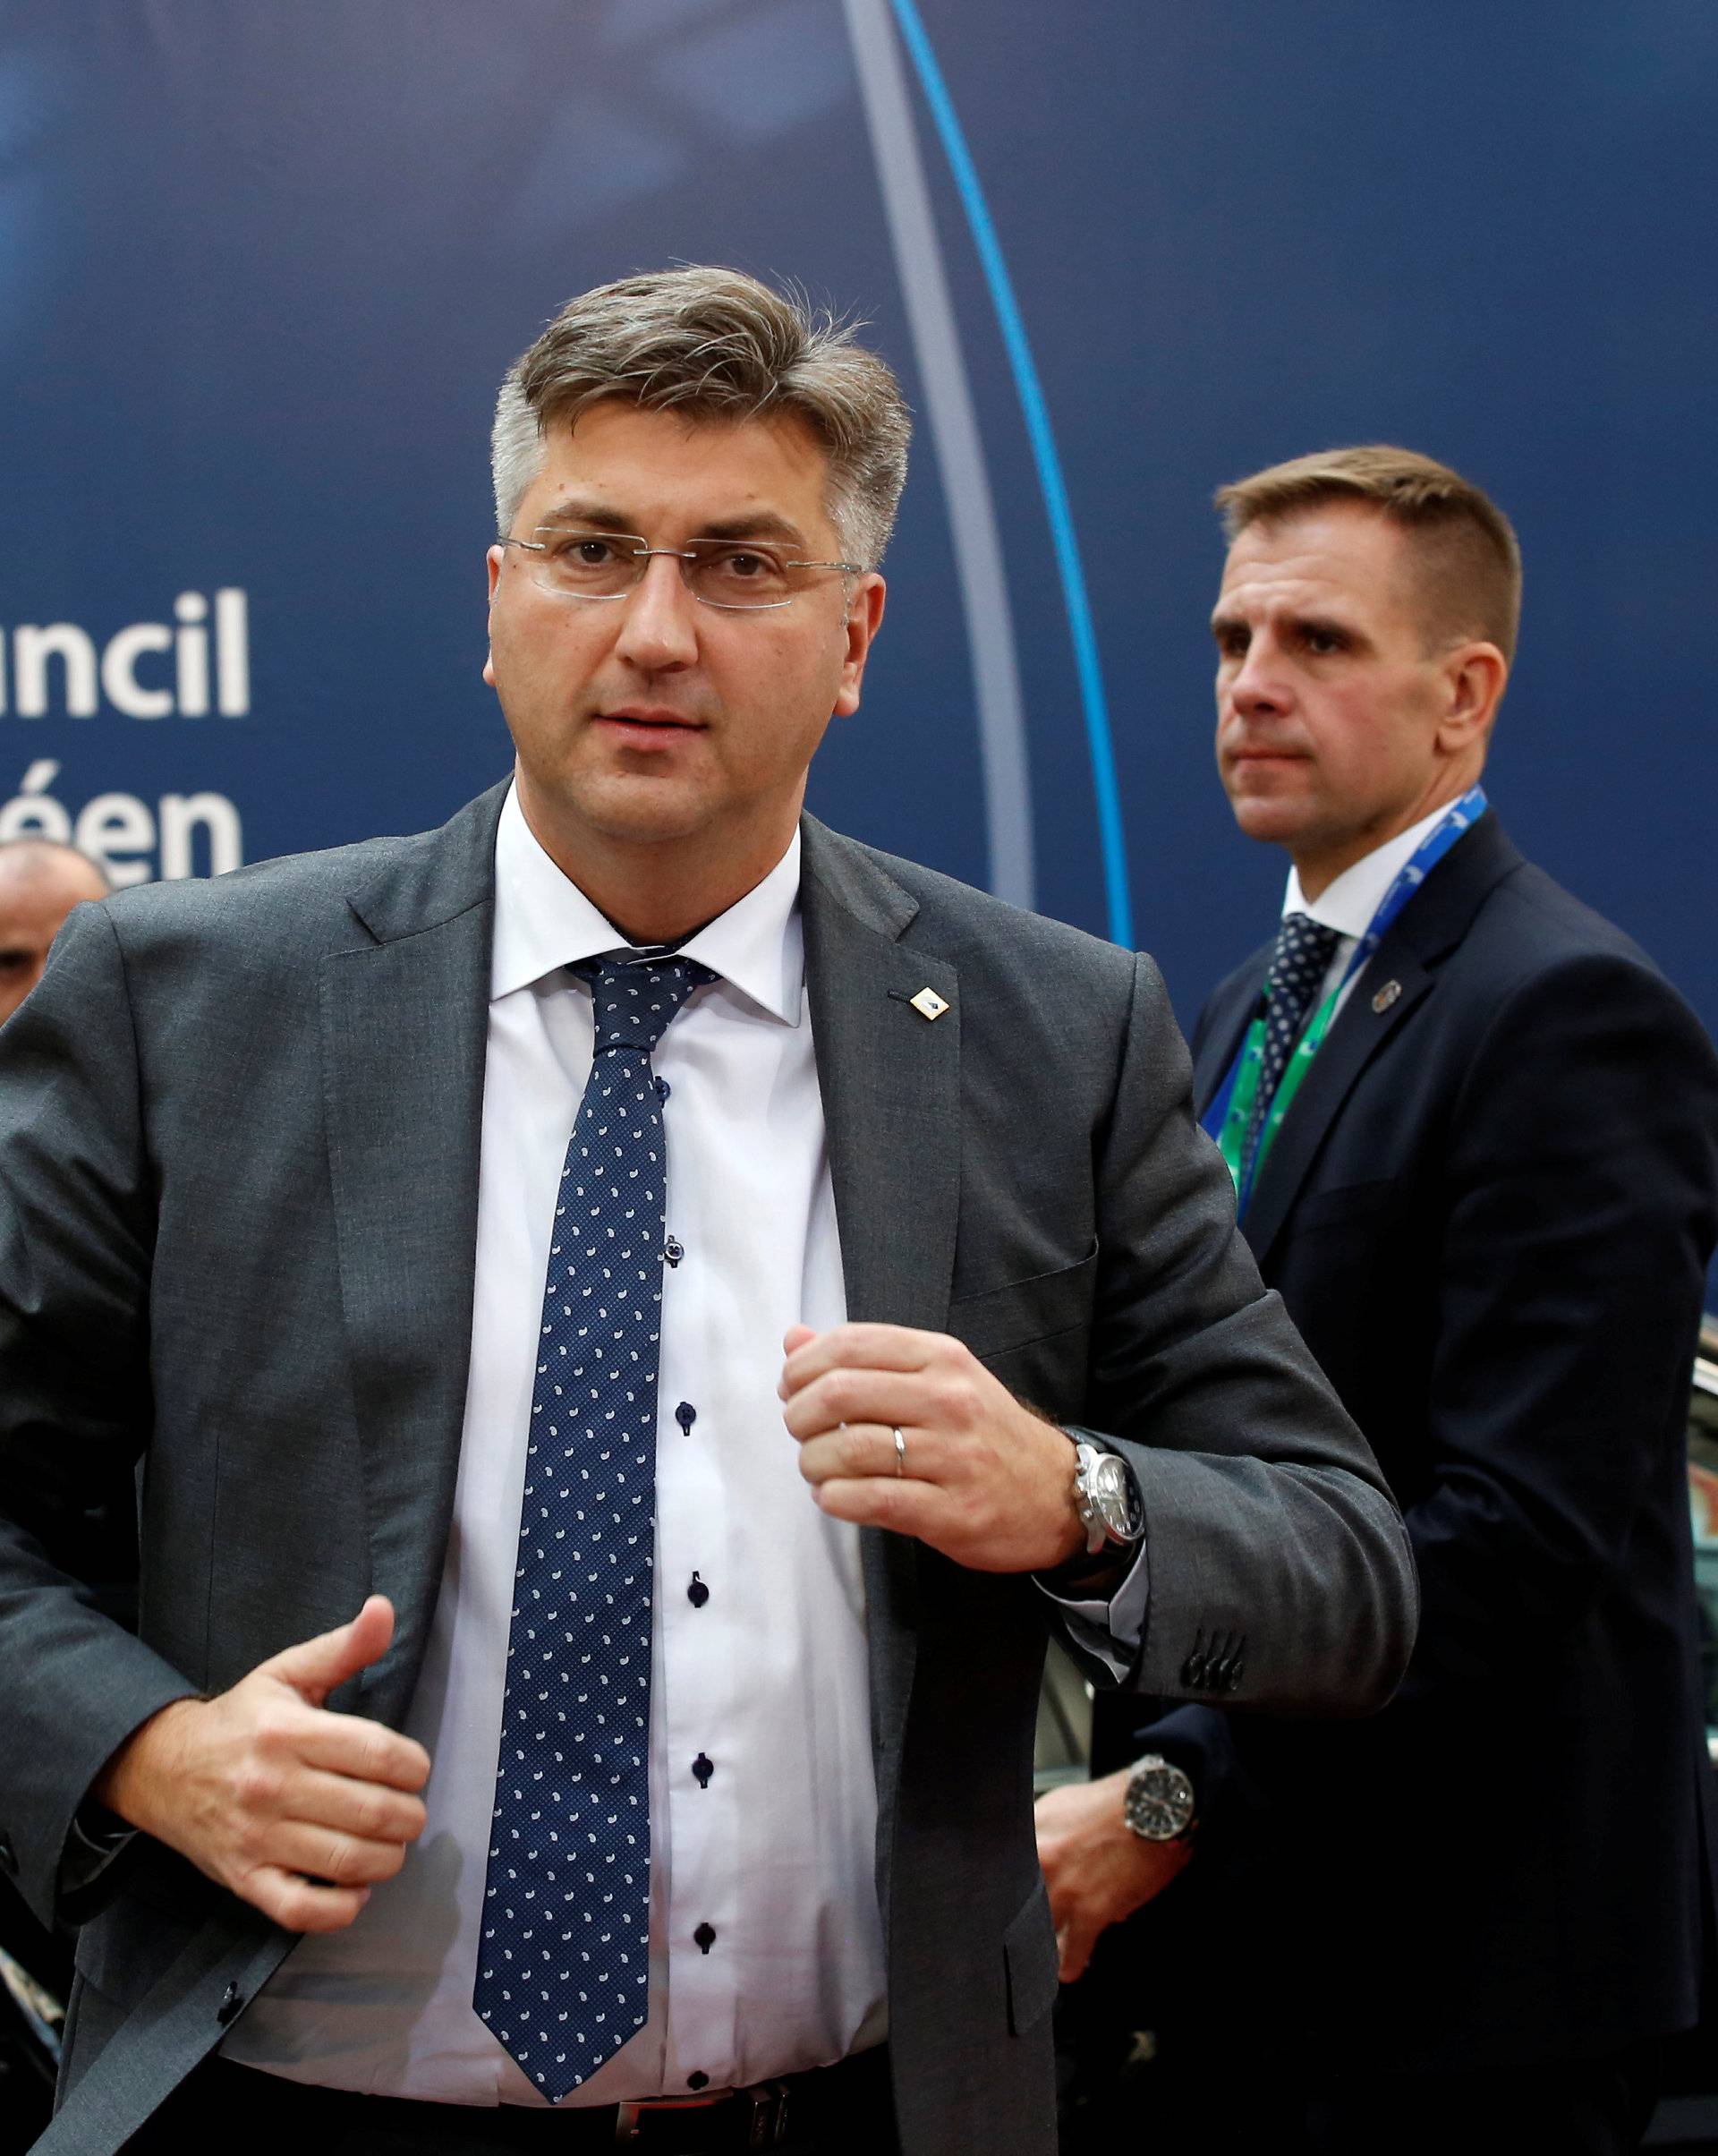 Croatian Prime Minister Andrej Plenkovic arrives at a EU summit at the European Council headquarters in Brussels